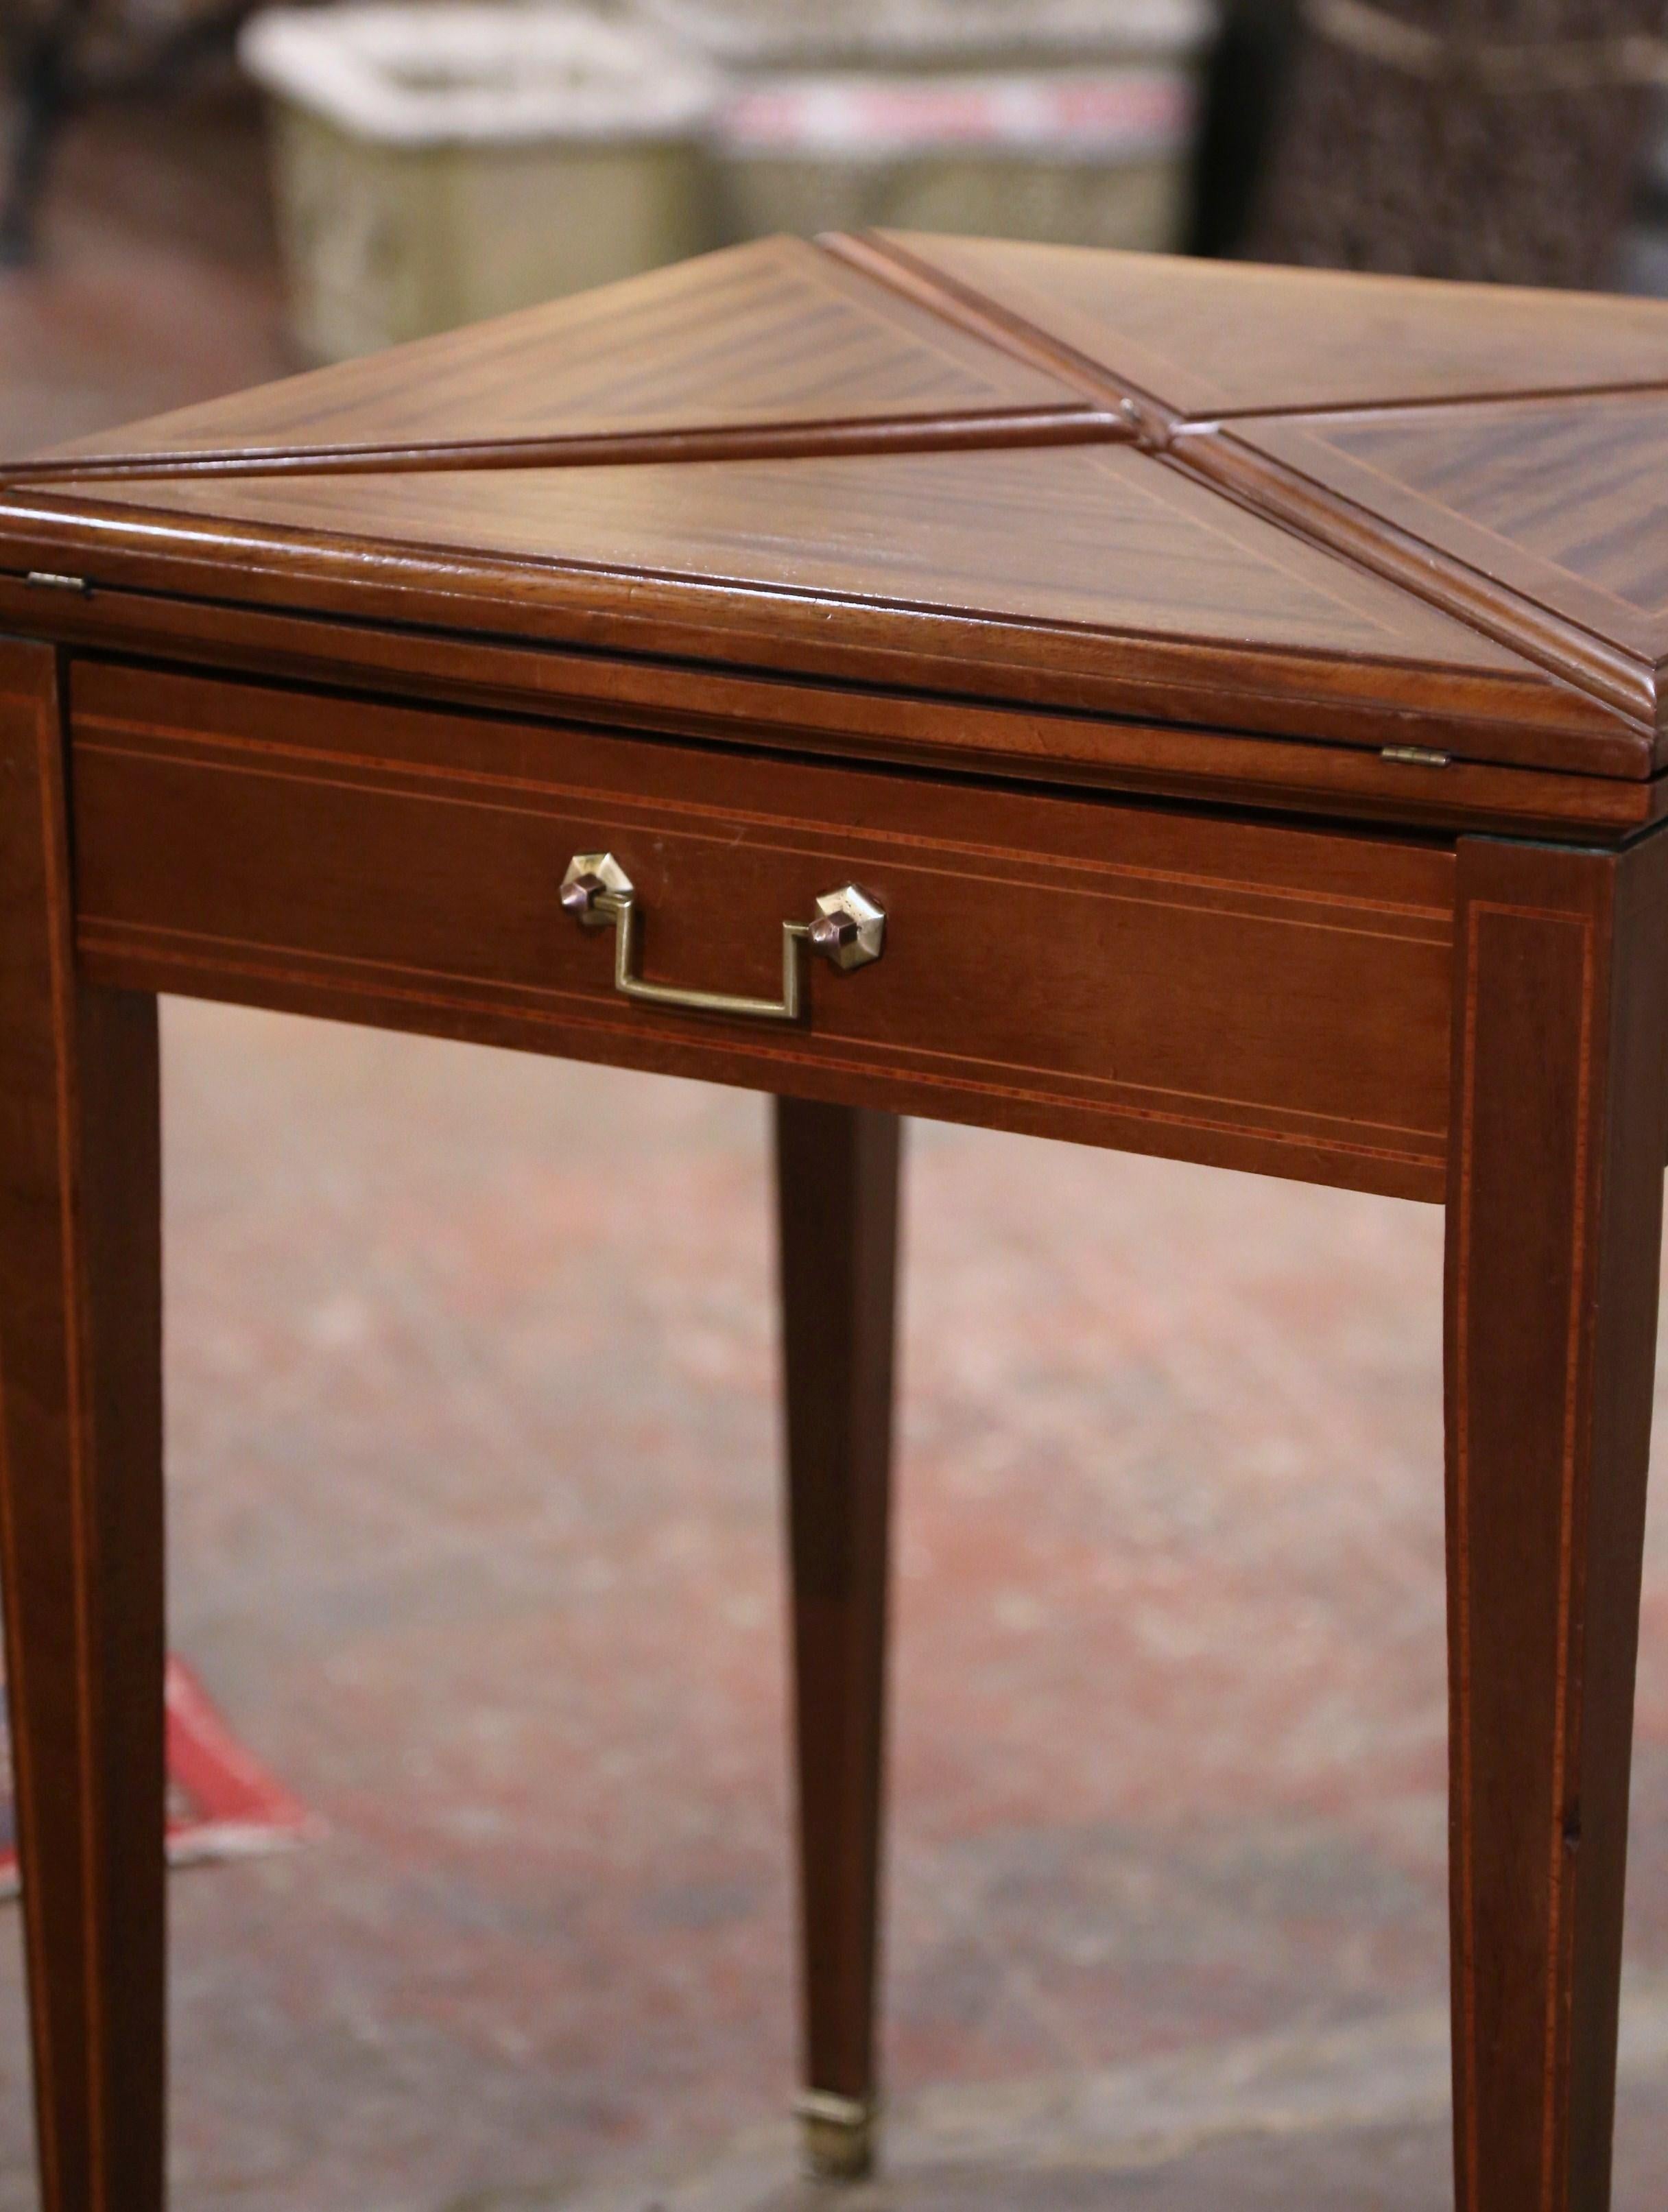 Decorate a game room or a den with this elegant folding card table. Crafted in France circa 1930 and built of mahogany wood with marquetry bands throughout, the square table stands on tapered legs ending with bronze feet covers, over a straight